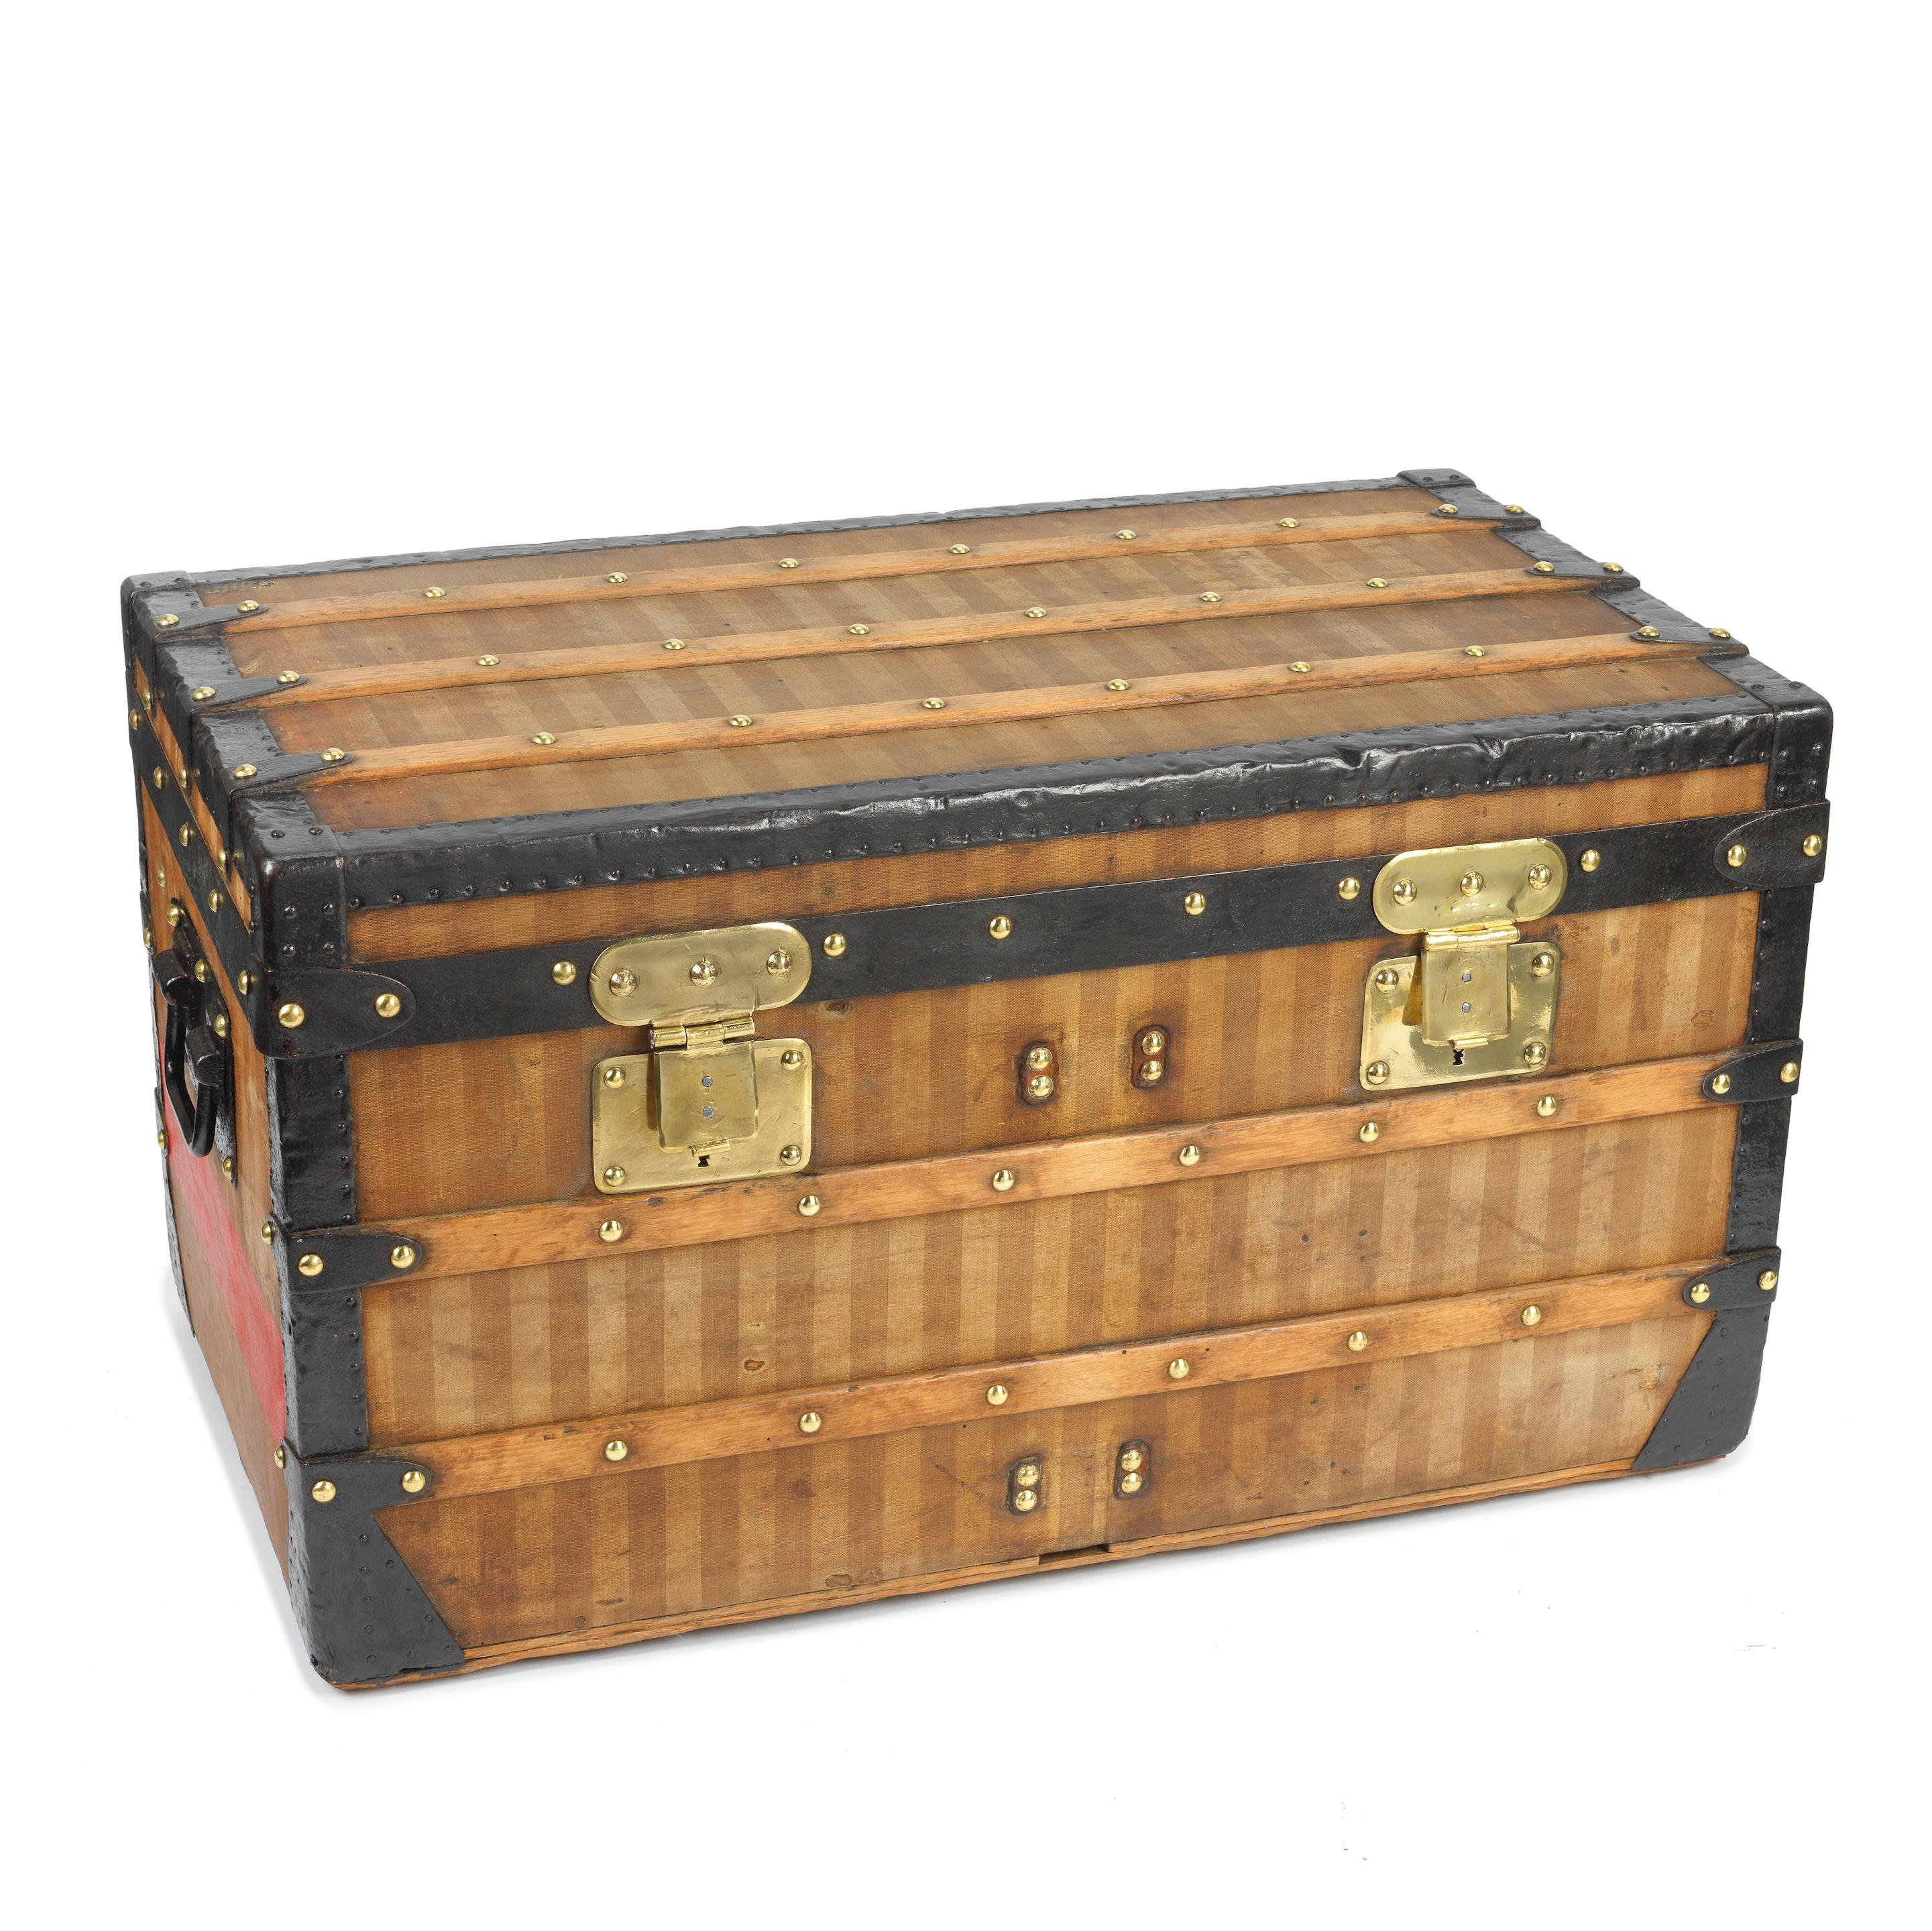 Vintage Louis Vuitton trunk sold at auction on 7th December